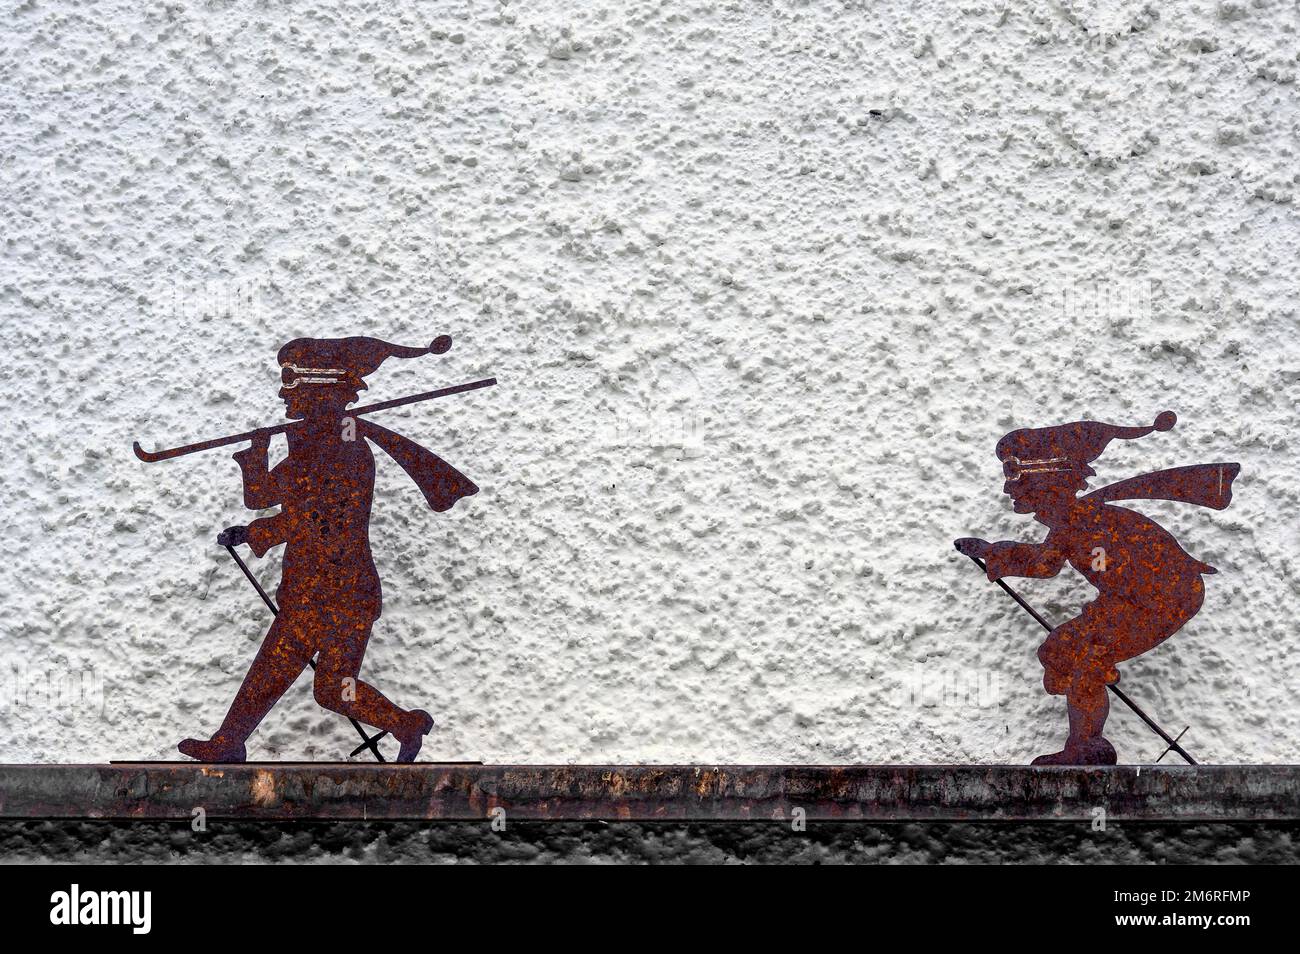 Zei iron rusty skiers in front of house wall, Hindelang, Allgaeu, Bavaria, Germany Stock Photo